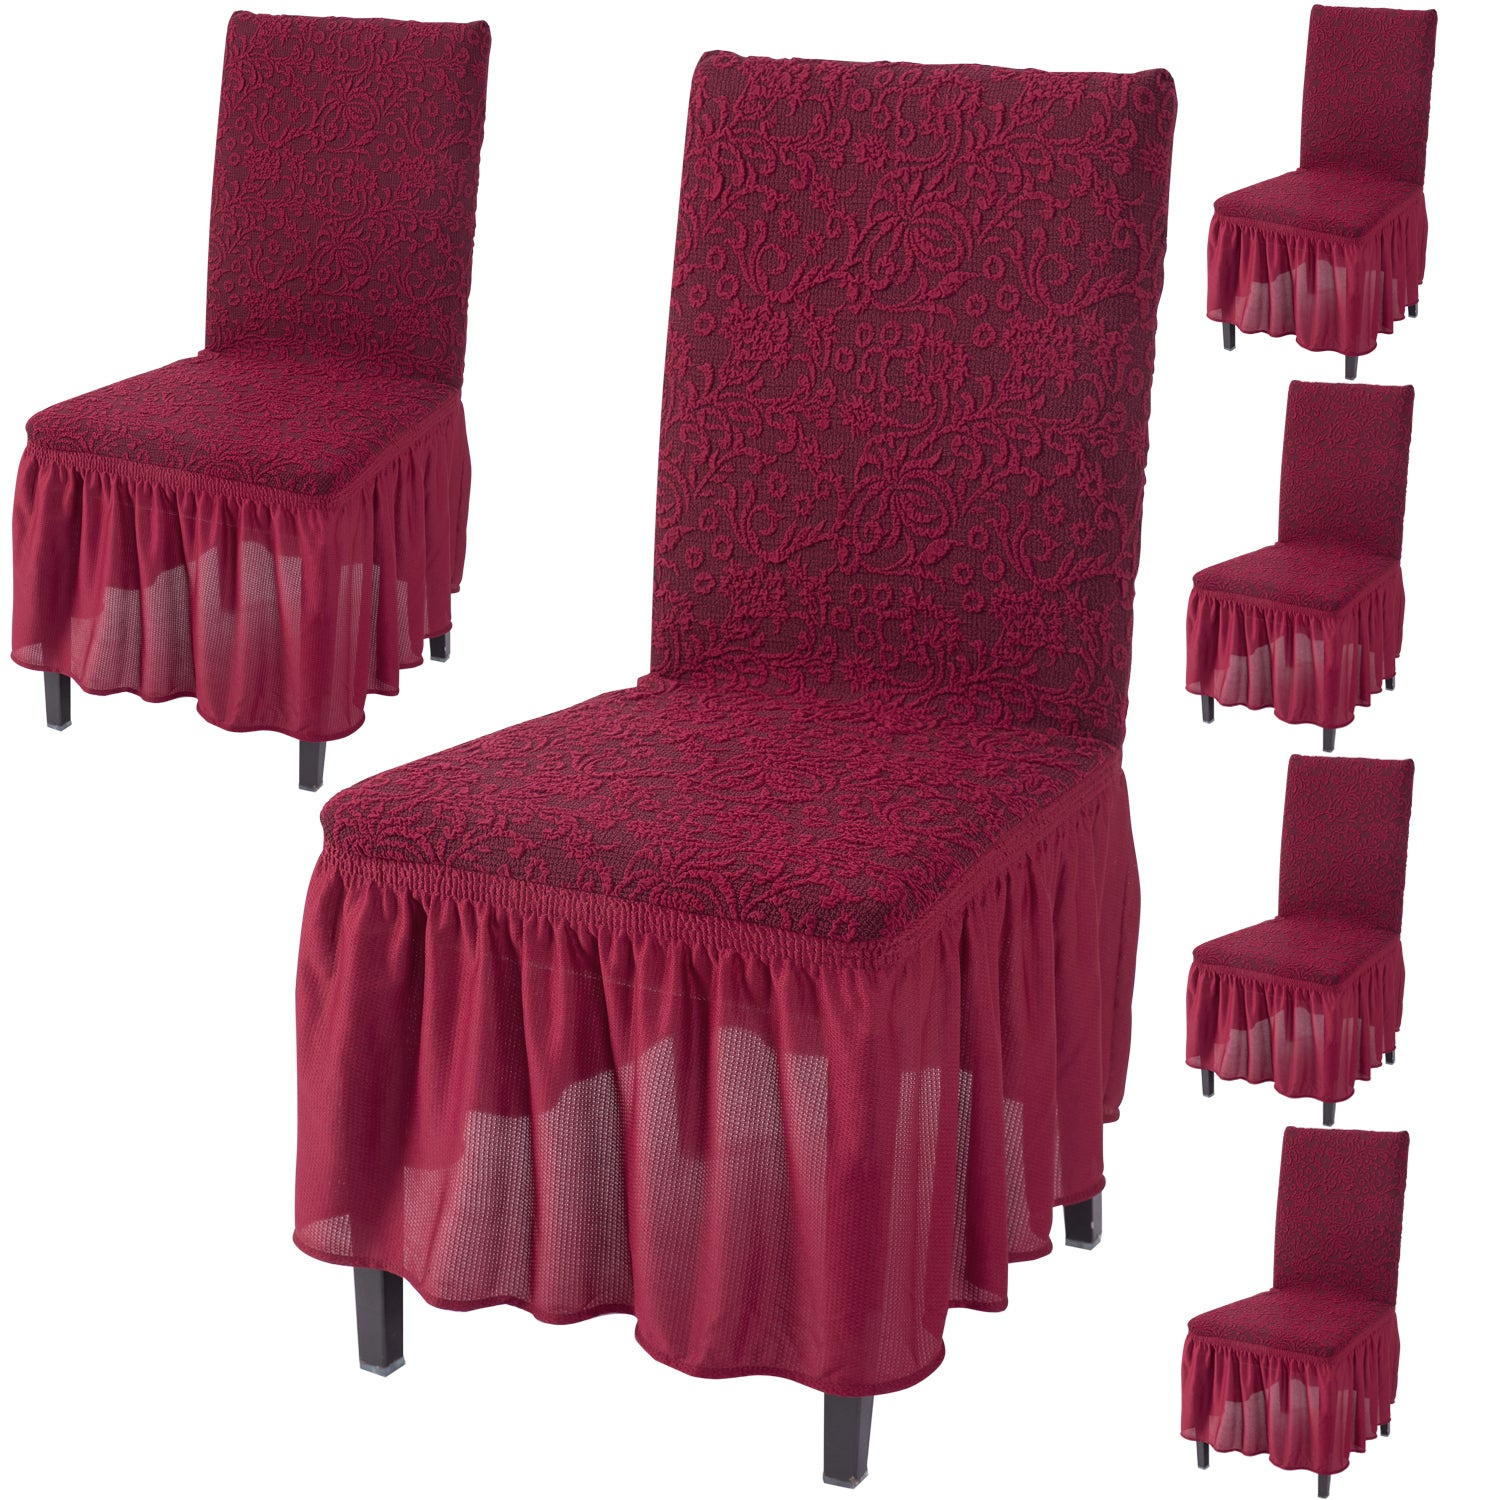 Elastic Stretchable Designer Woven Jacquard Dining Chair Cover with Frill, Wine Red